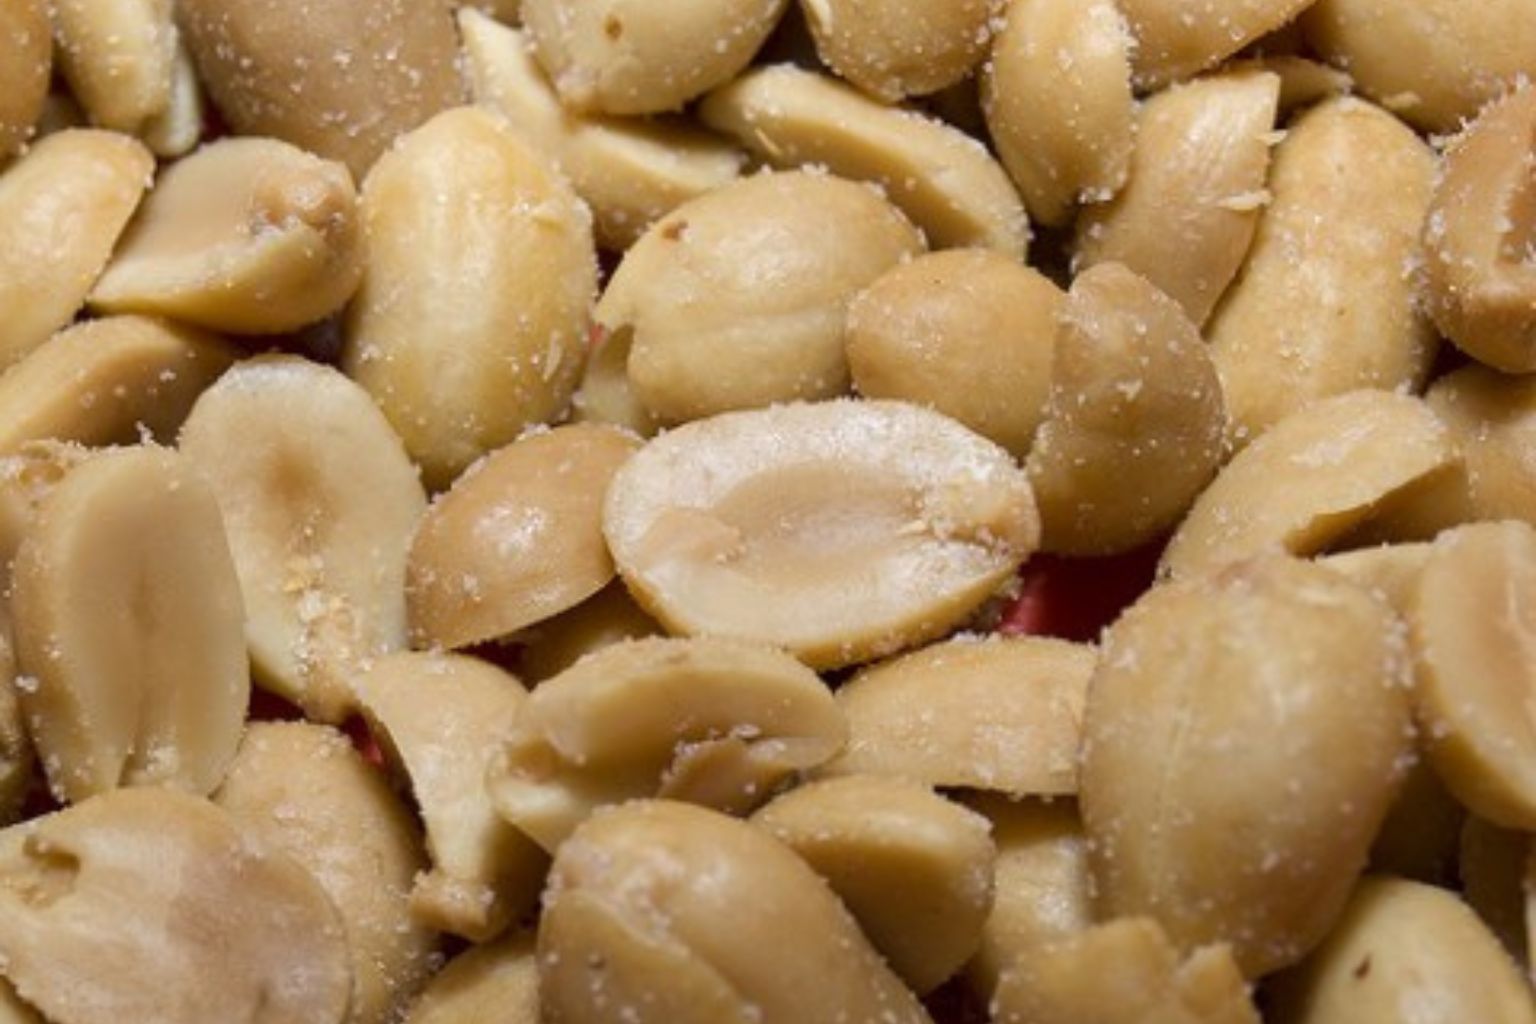 Peanut allergy is the most common cause of food-related death, according to the Asthma and Allergy Foundation of America.